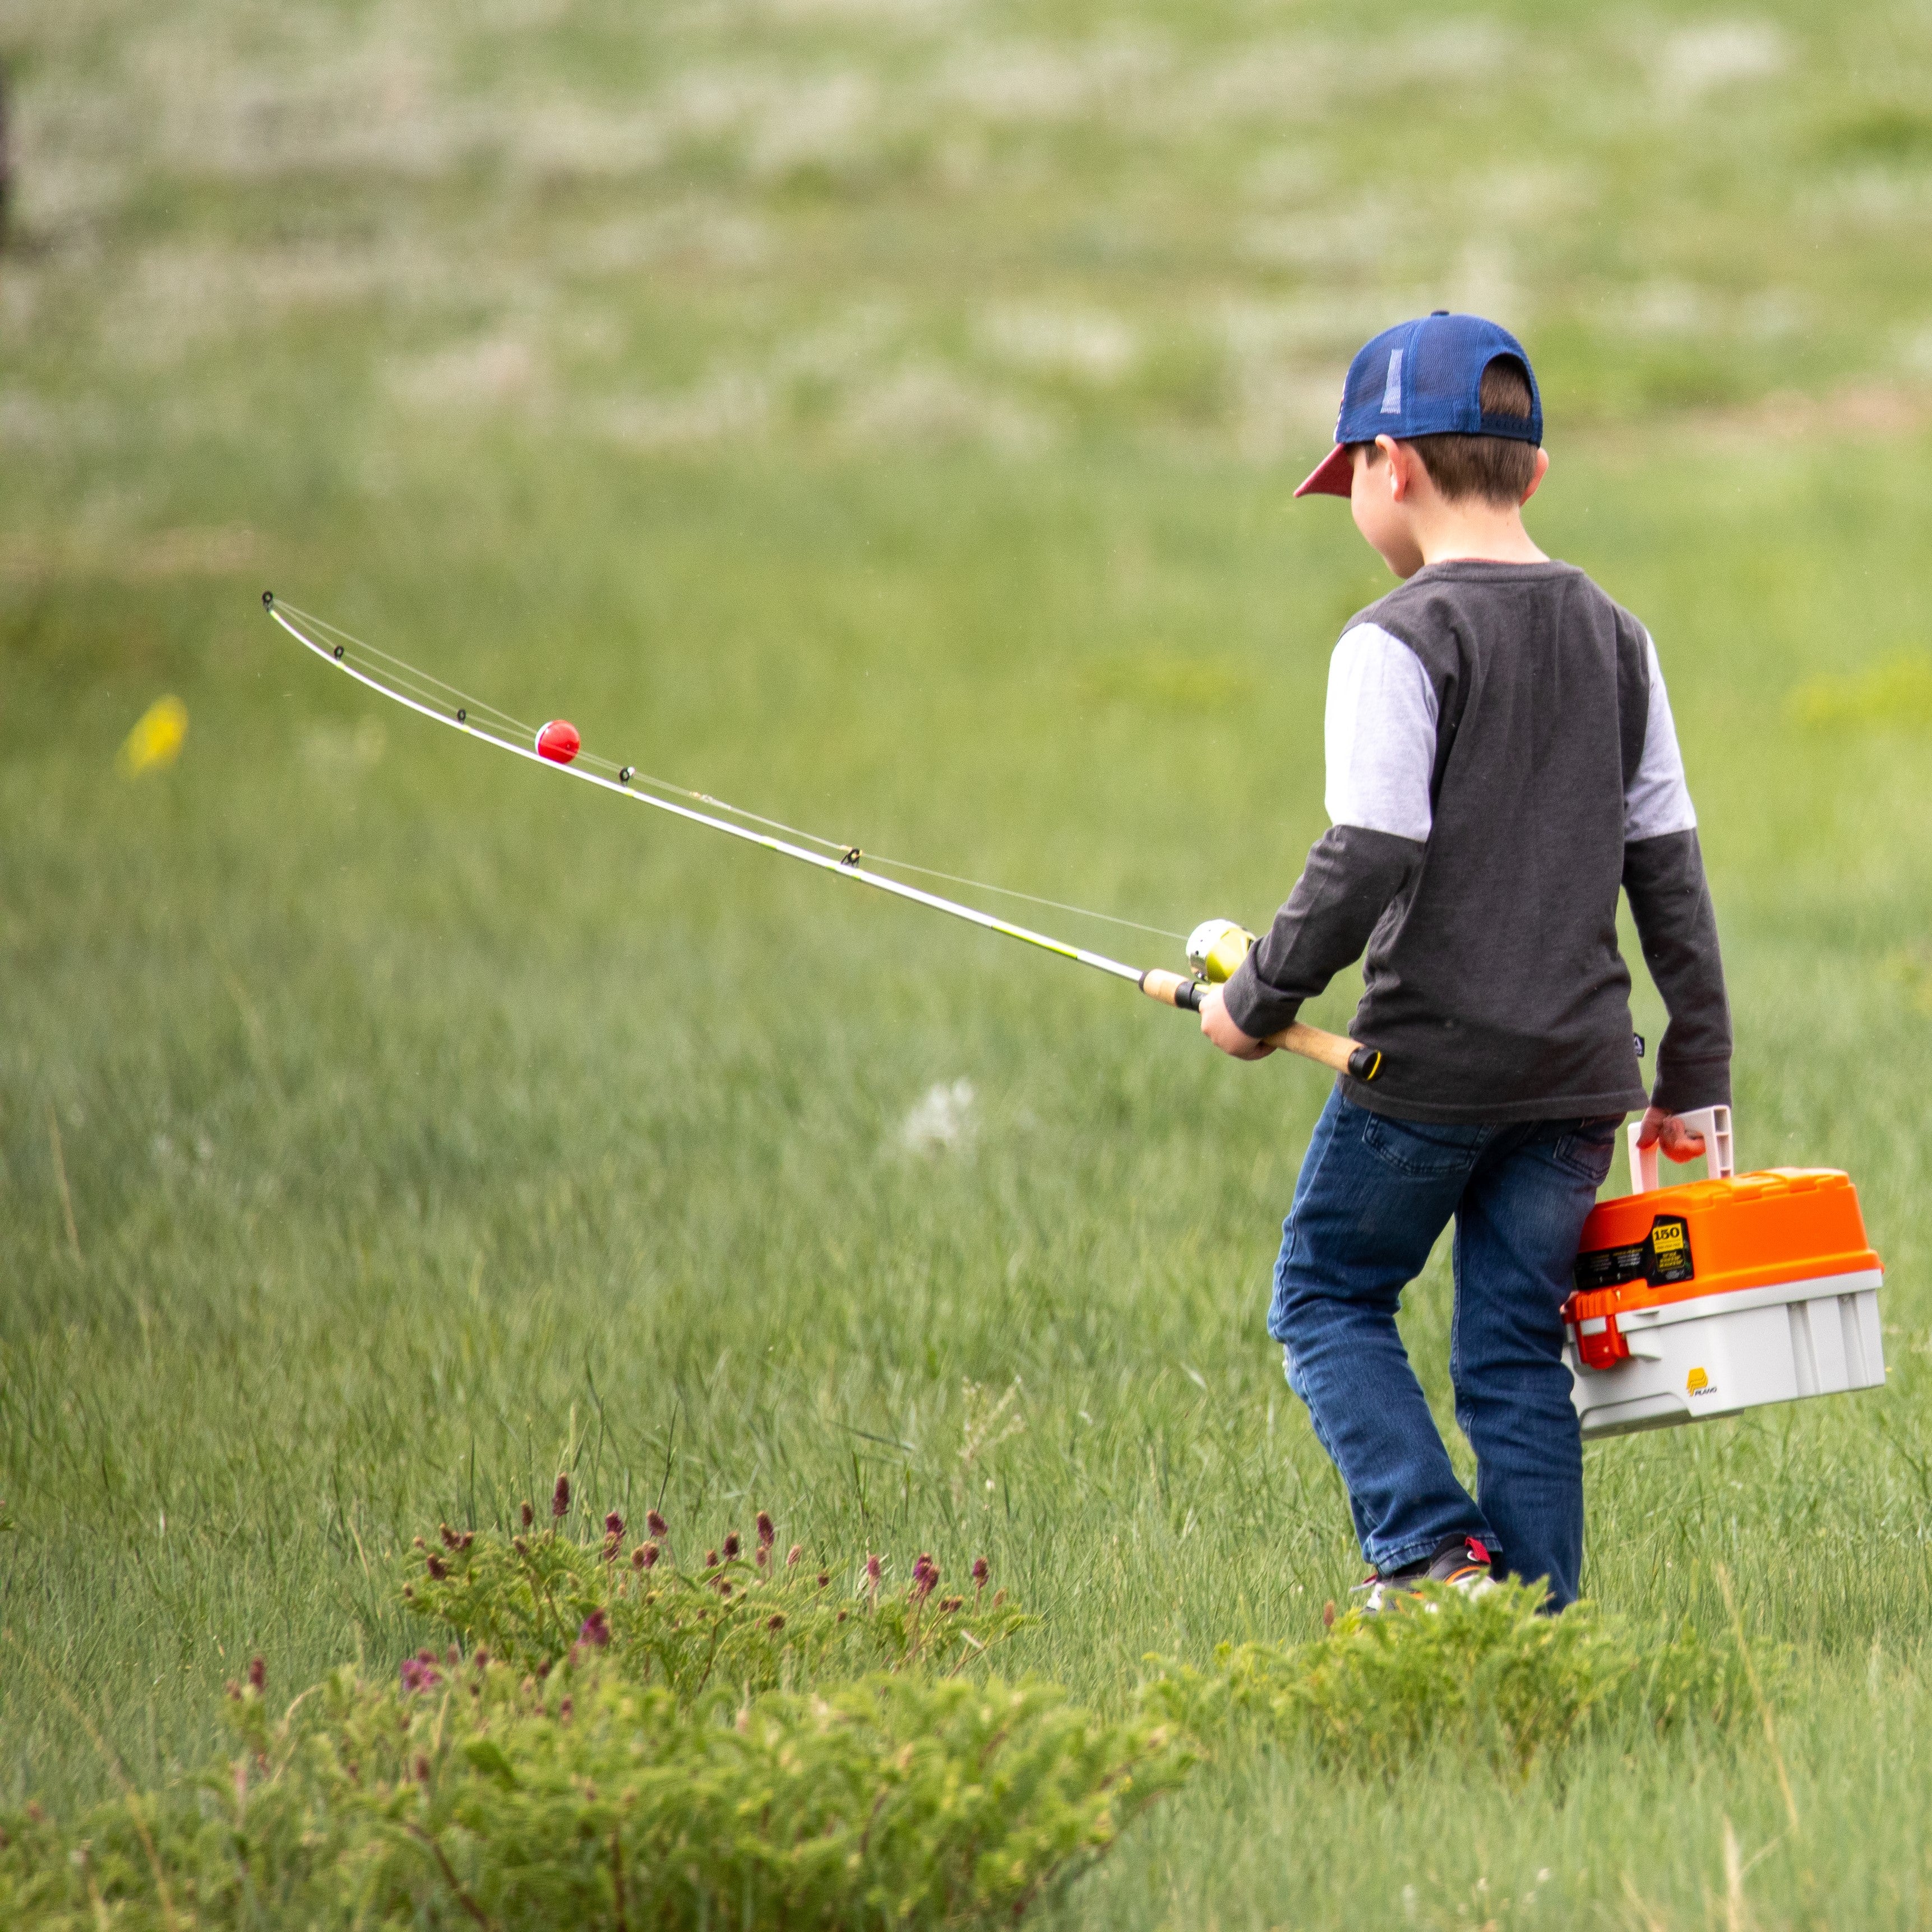 A kid with a fishing pole and tacklebox walks through a field